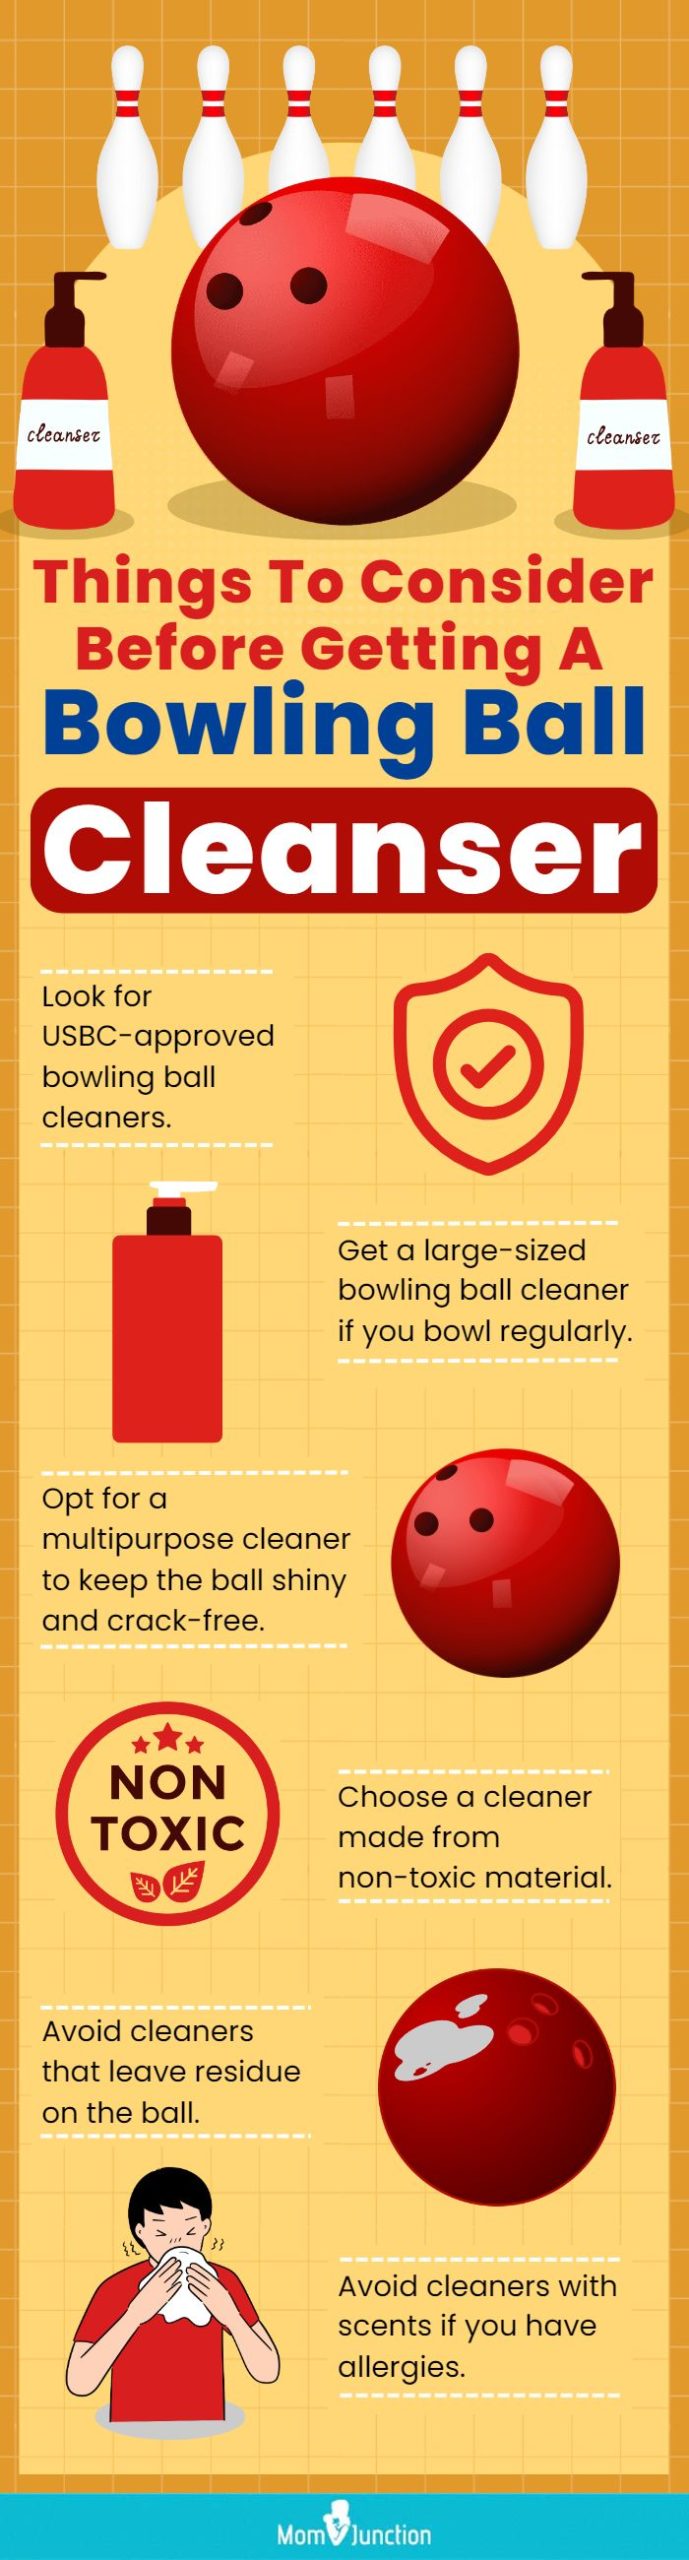 Things To Consider Before Getting A Bowling Ball Cleanser (Infographic)